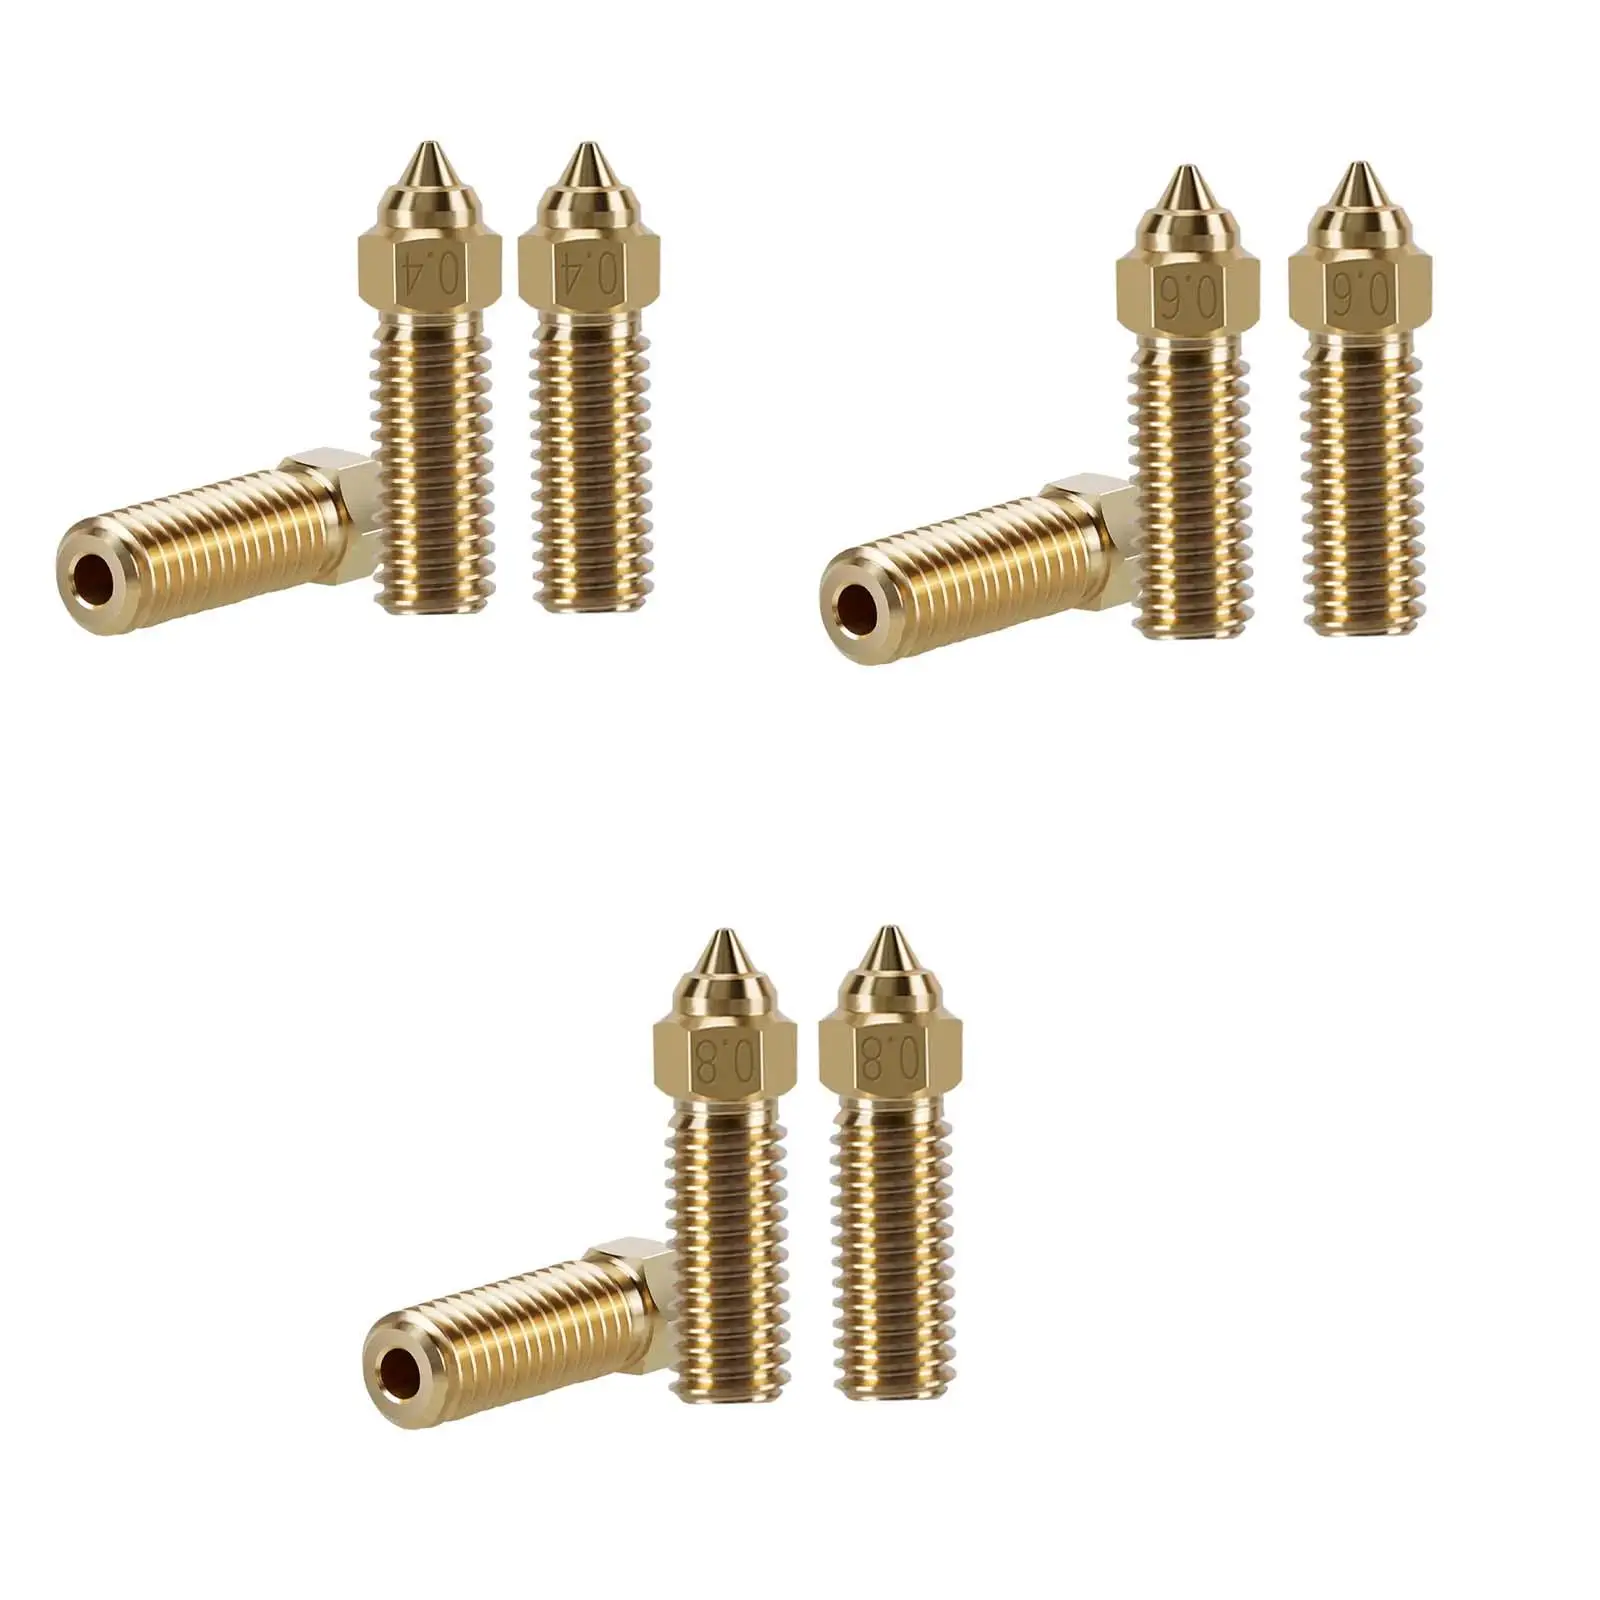 3x 3D Printer Nozzles High Speed Printing High Flow Replacement Parts for K1